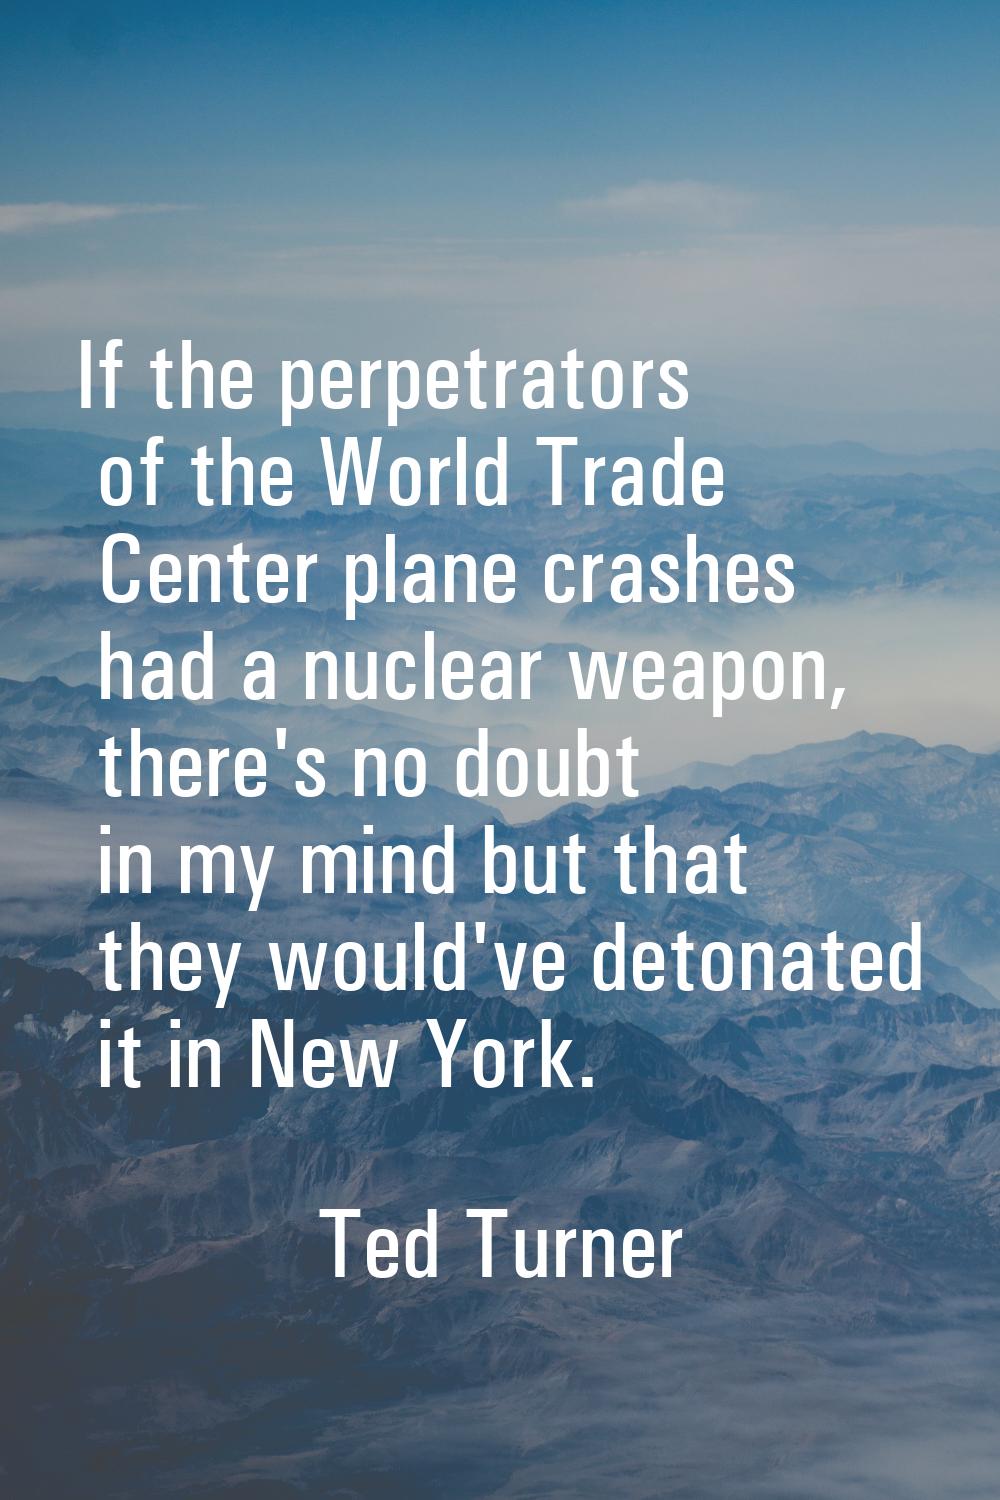 If the perpetrators of the World Trade Center plane crashes had a nuclear weapon, there's no doubt 